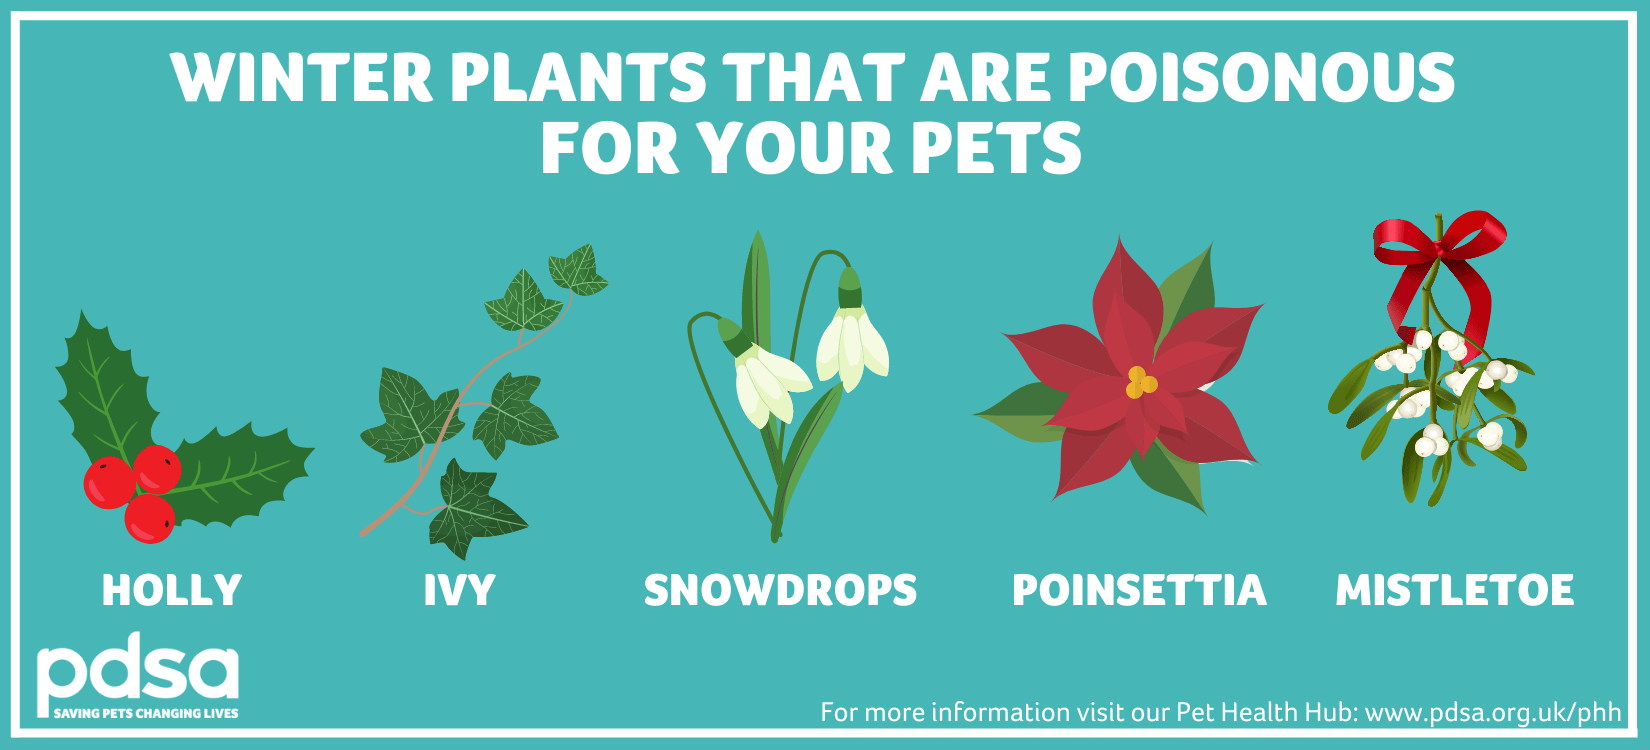 An image displaying winter plants that are poisonous to pets